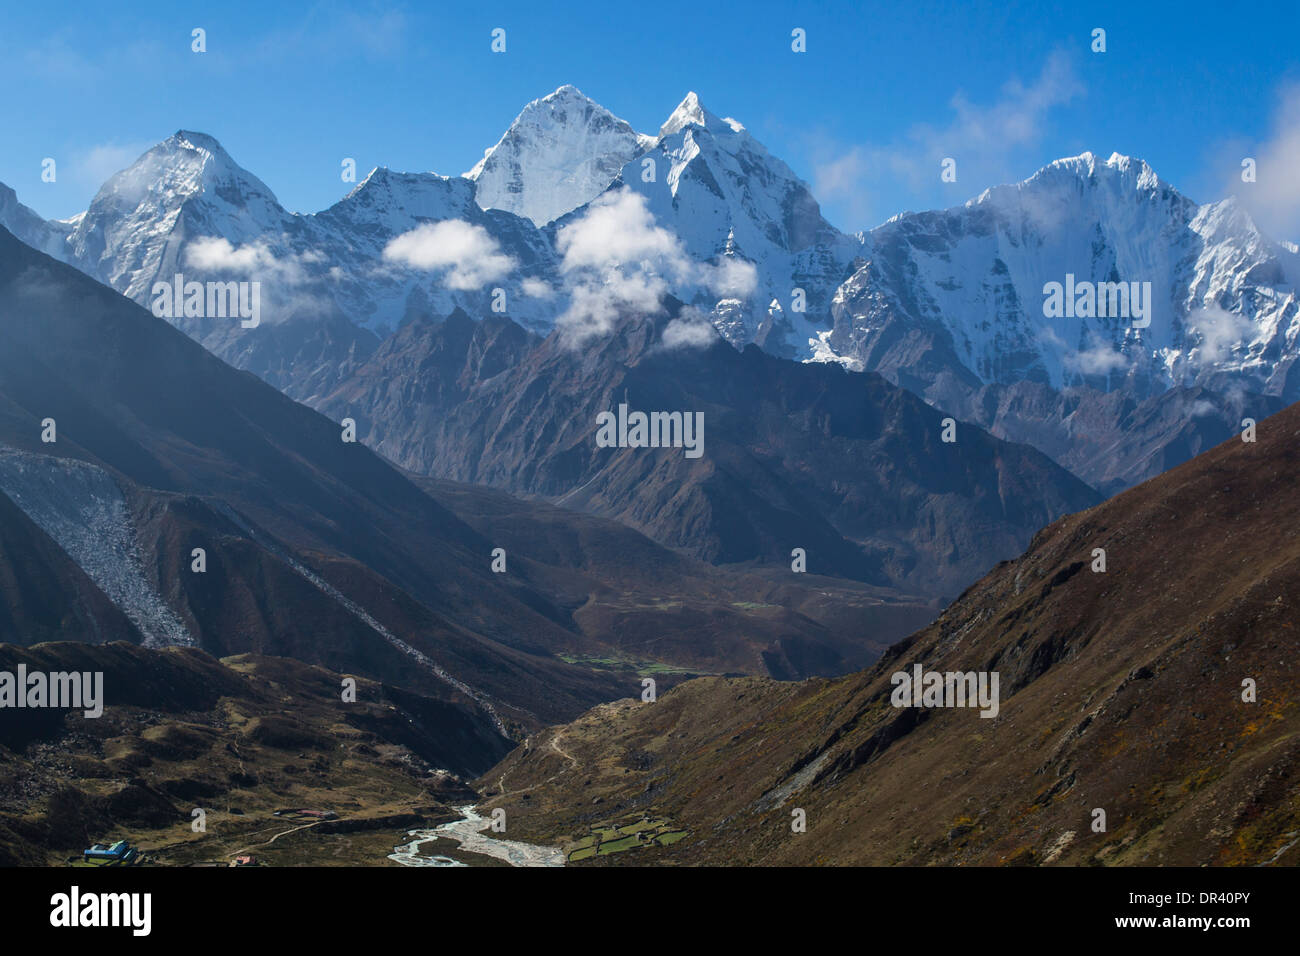 Snow covered mountains in Himalayas Stock Photo